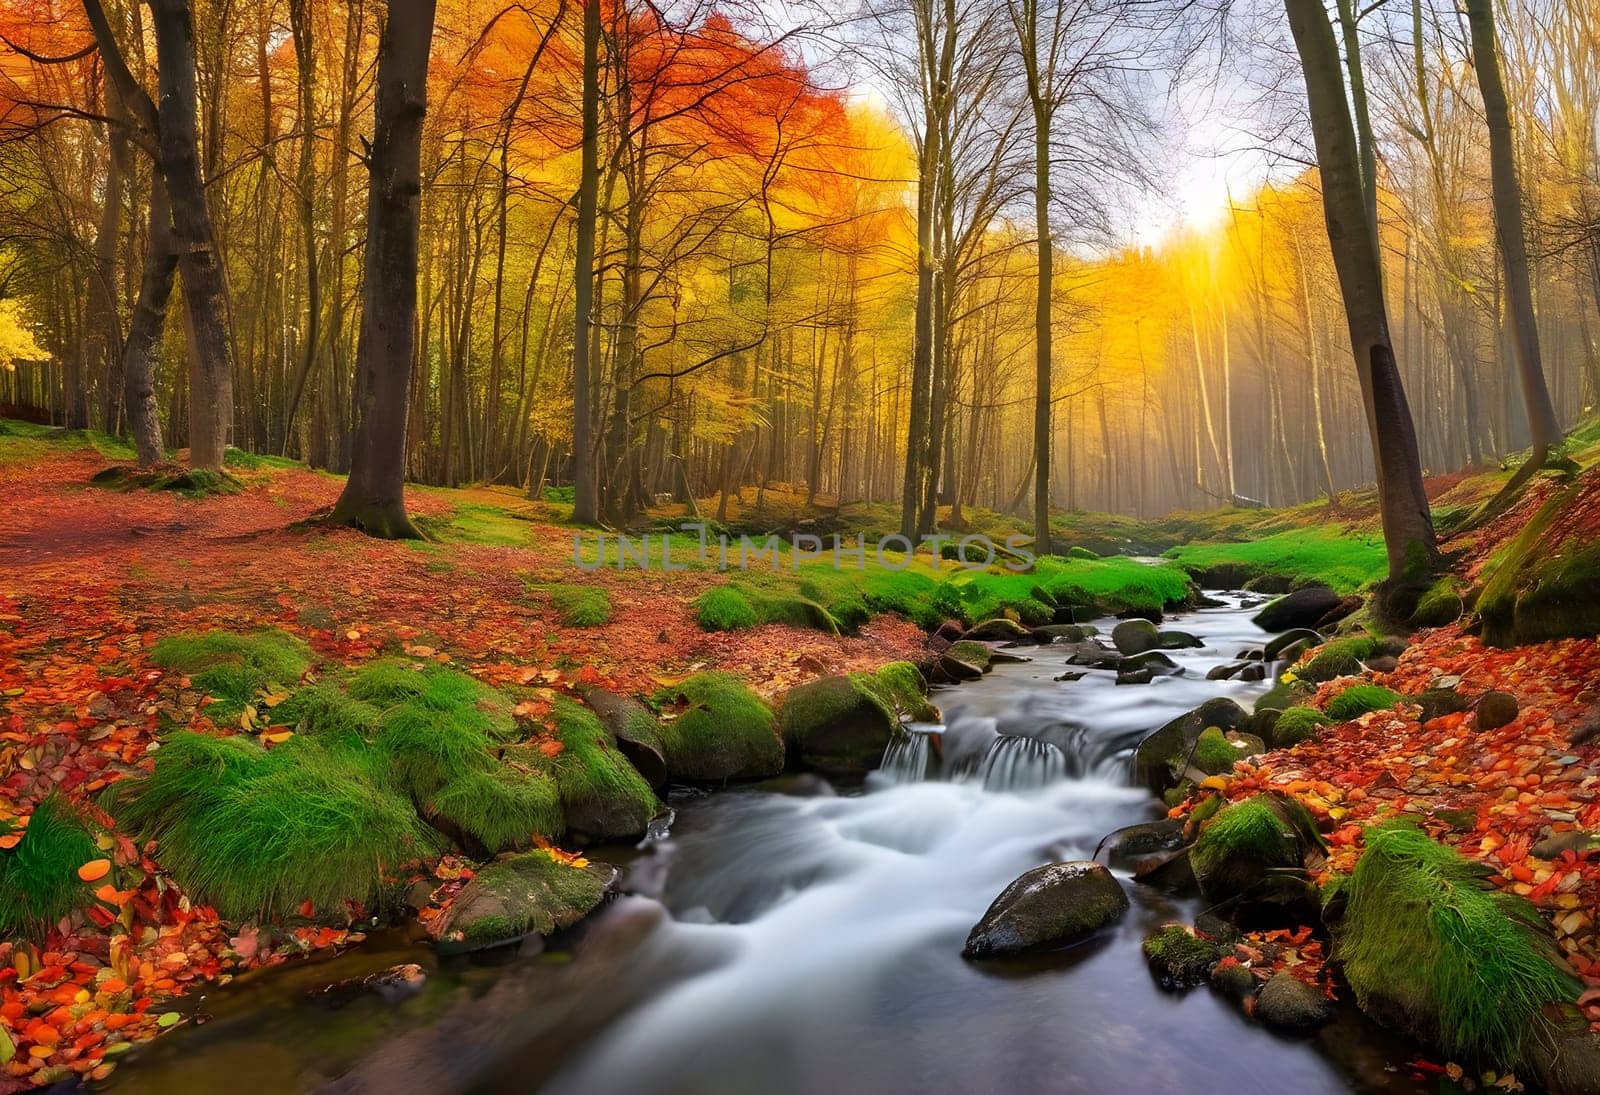 Autumn Serenity: A River's Journey Through the Forest by Petrichor